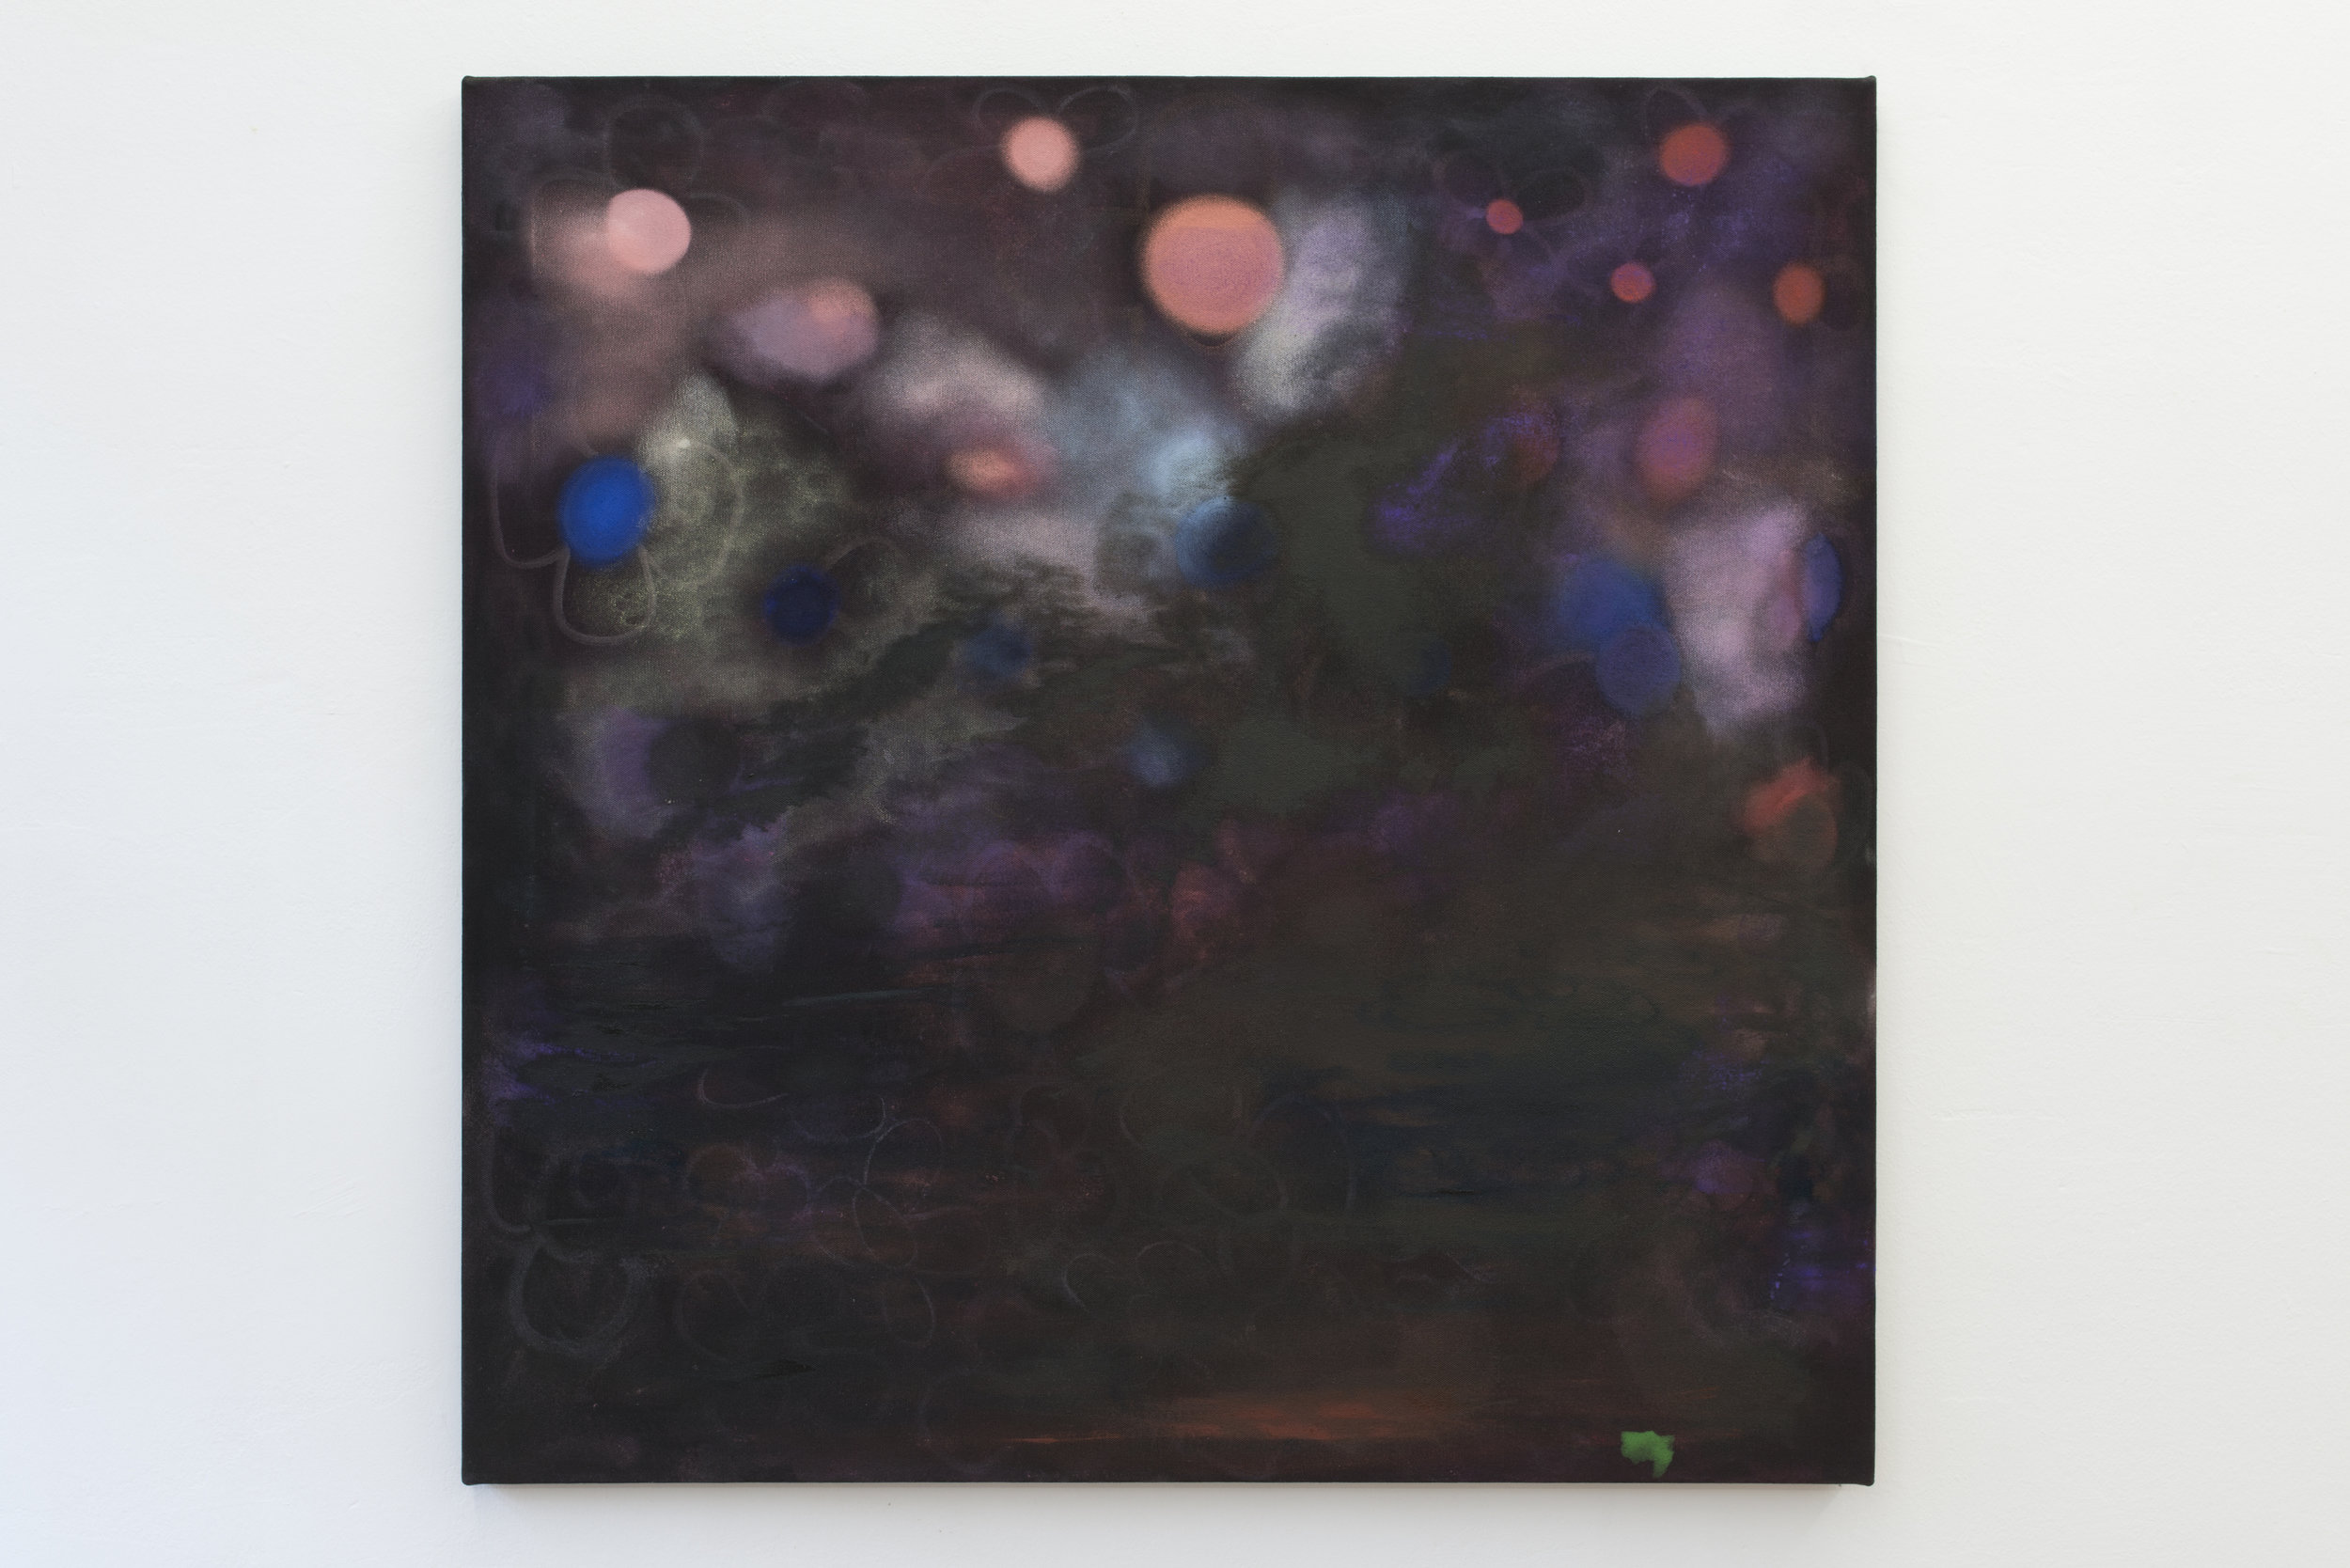  Kate Spencer Stewart,  Untitled , 2018. Oil on canvas 119.38 × 119.38 cm Courtesy of Park View/Paul Soto, Los Angeles and Brussels     